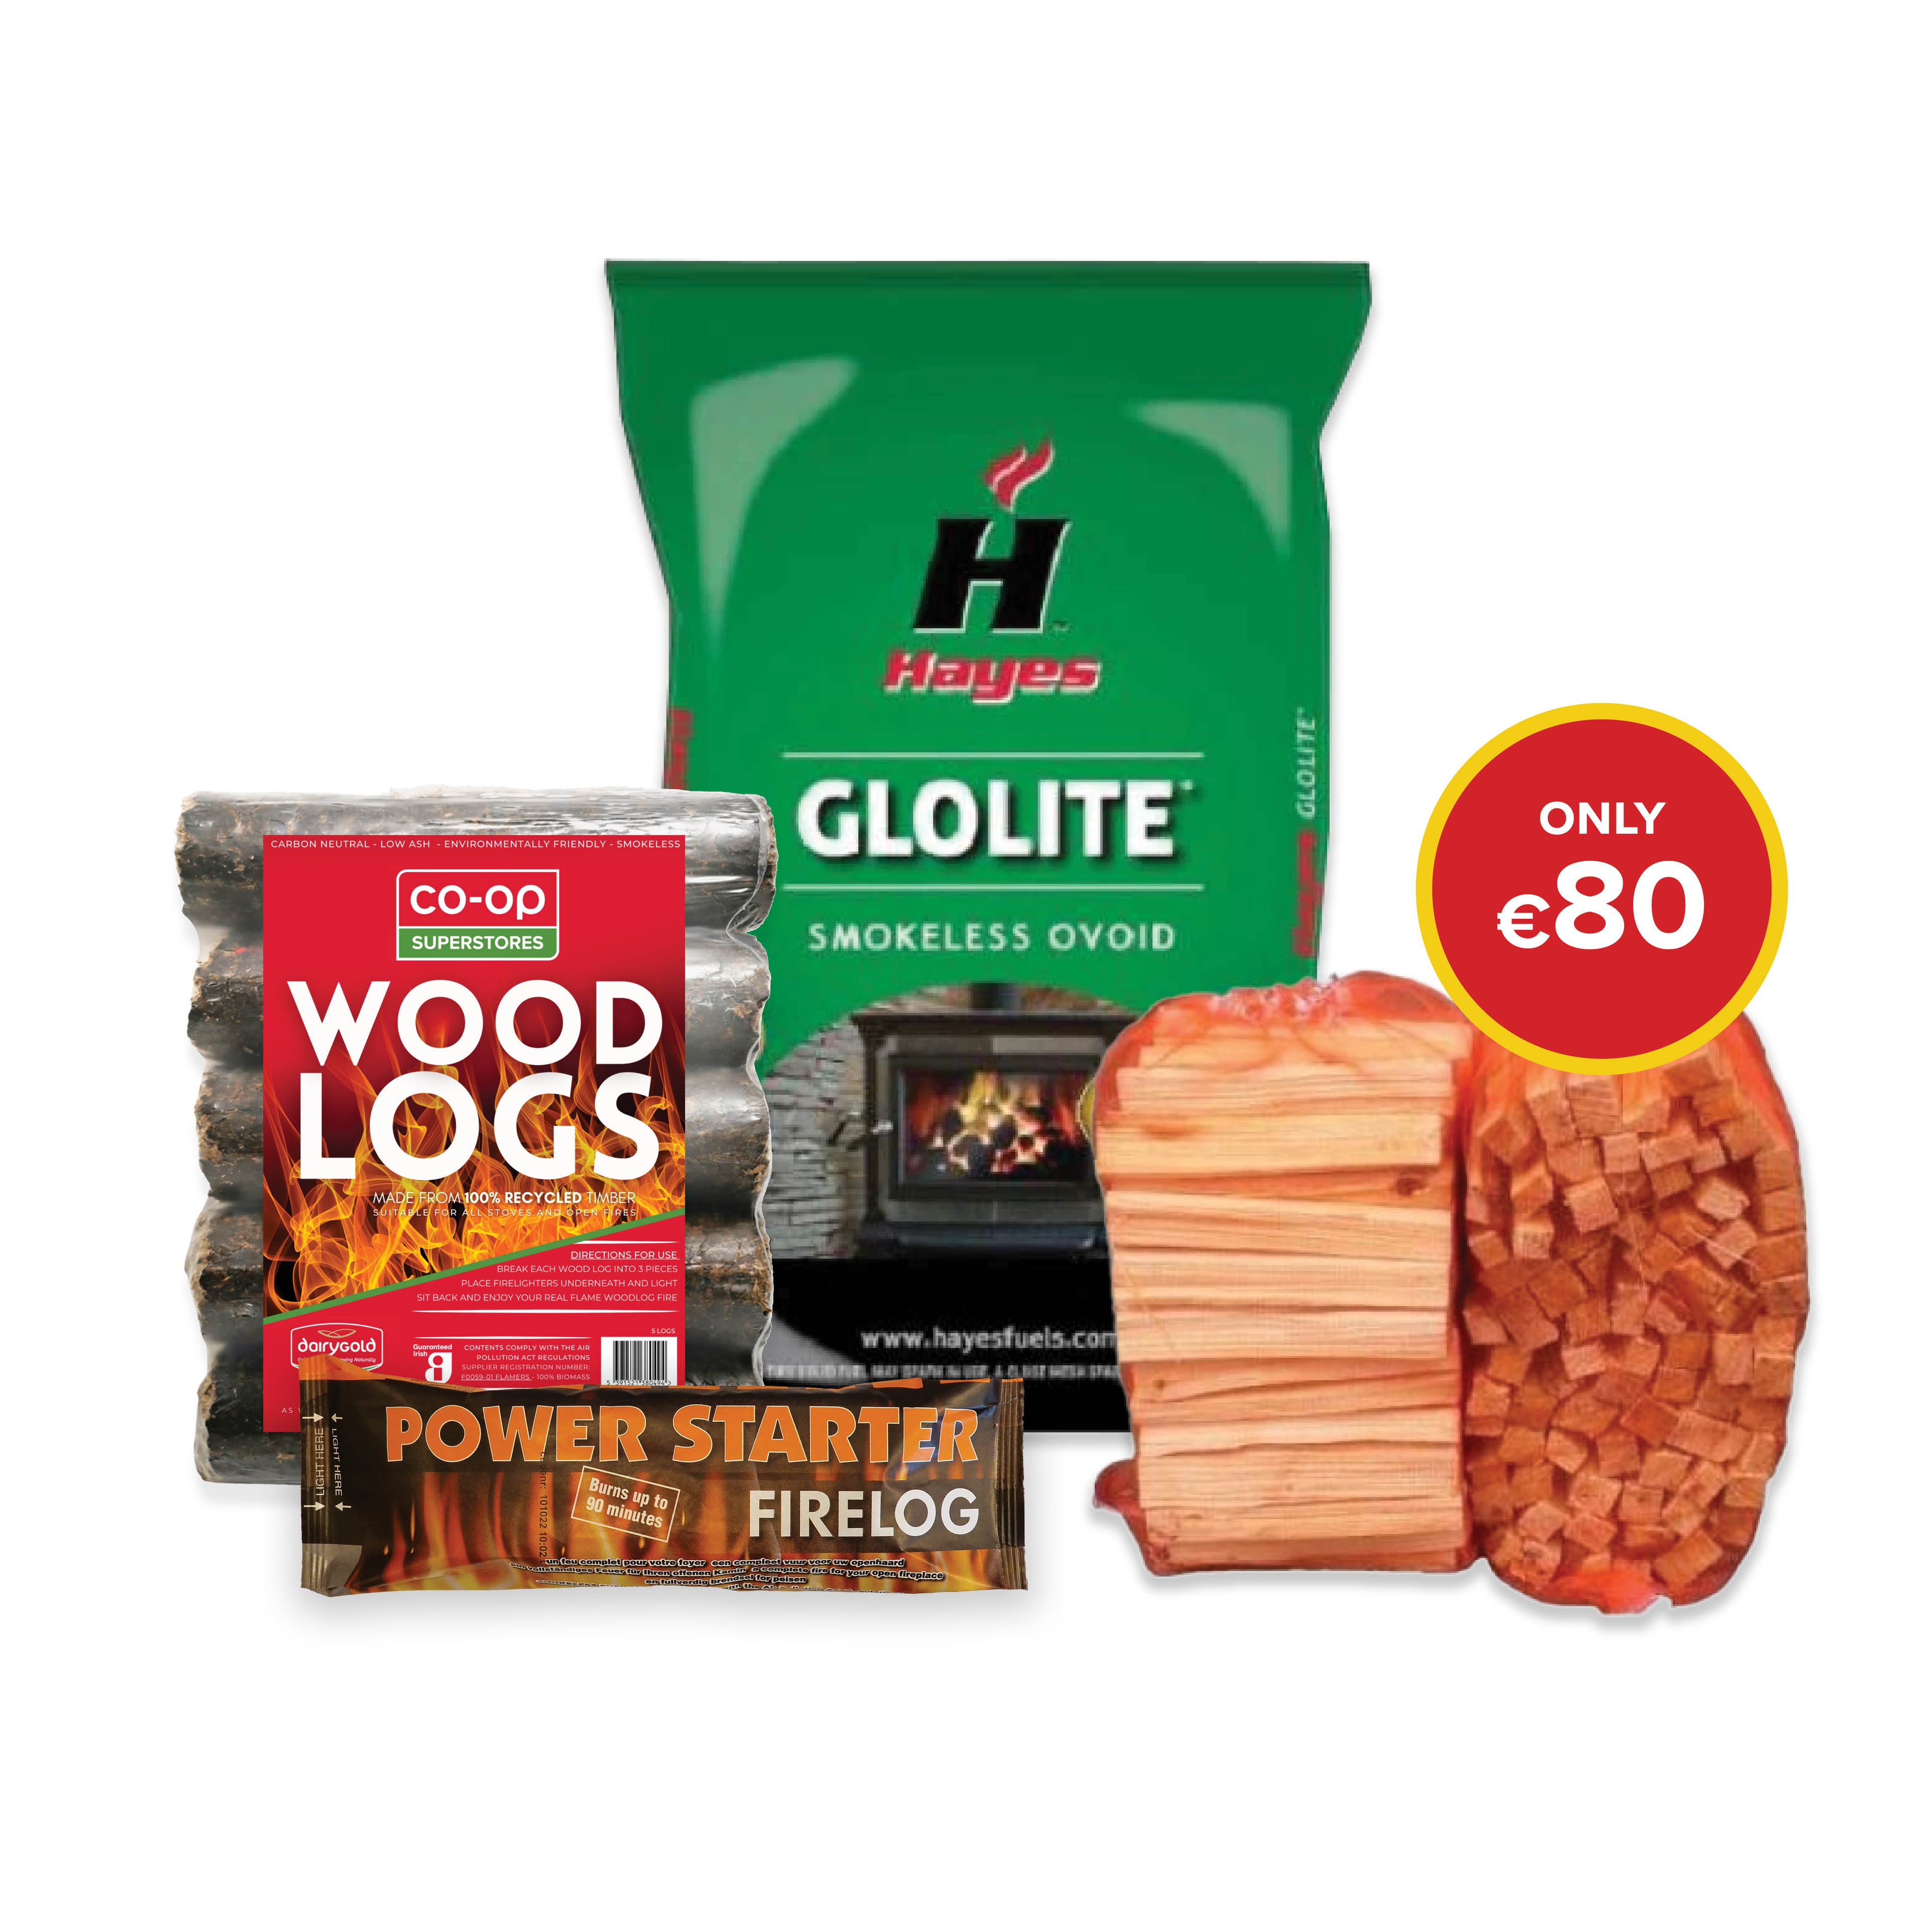 Buy 3 bag Glolite 20kg, 10 Firelogs, 3 bags of Kindling and 3 bale of Woods logs 5s for €80